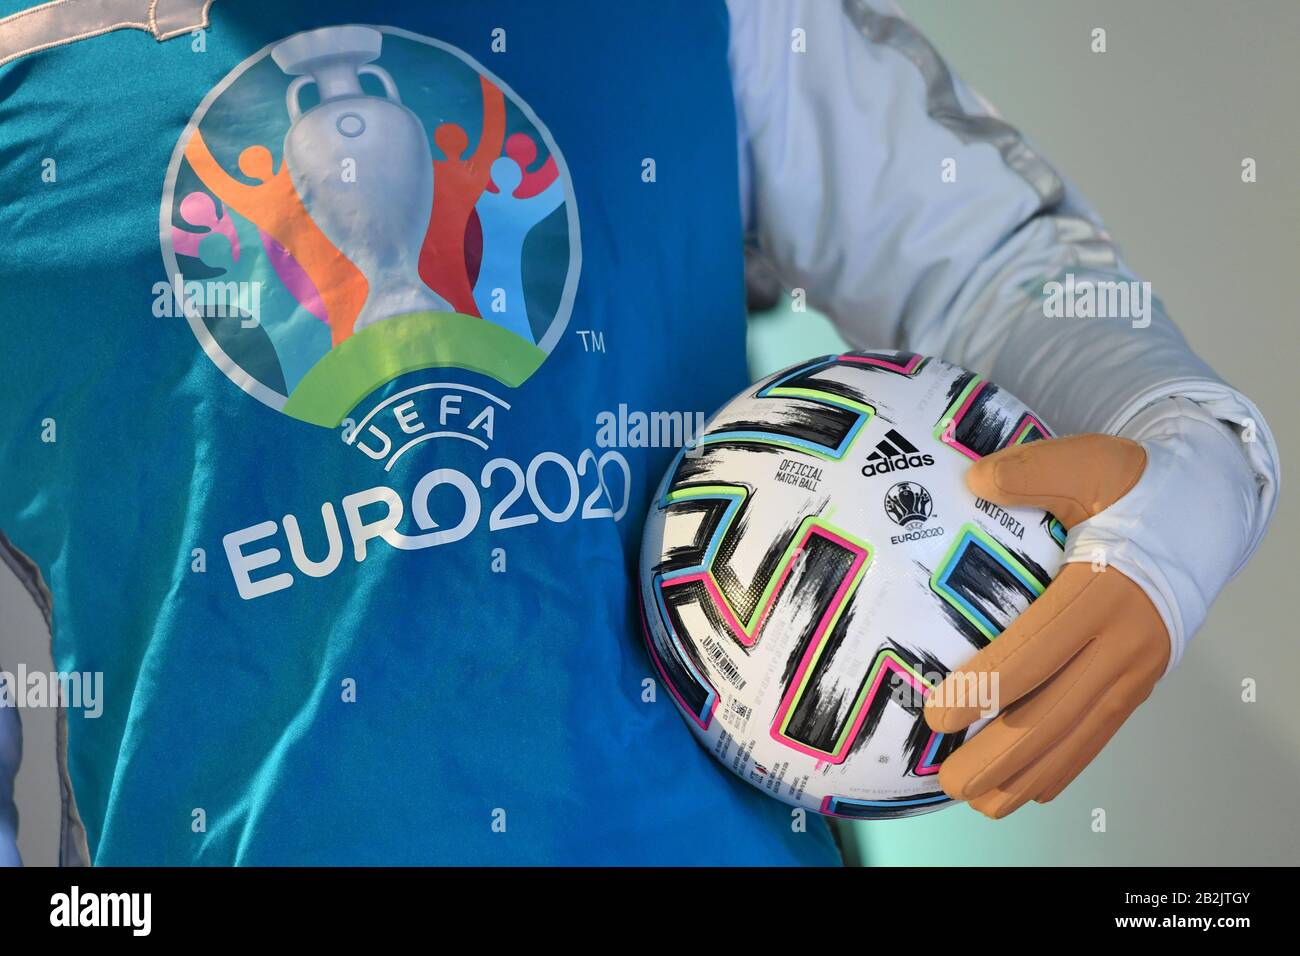 Close Up Mascot Skillzy with Uefa EURO 2020 logo, emblem and the official game ball. Press appointment? Munich loves Europe? in the Olympic Park? 100 days until the start of UEFA EURO 2020 on March 4th, 2020 in Munich/Olympiapark? SVEN SIMON Fotoagentur GmbH & Co. Pressefoto KG # Prinzess-Luise-Str. 41 # 45479 M uelheim/R uhr # Tel. 0208/9413250 # Fax. 0208/9413260 # GLS Bank # BLZ 430 609 67 # Kto. 4030 025 100 # IBAN DE75 4306 0967 4030 0251 00 # BIC GENODEM1GLS # www.svensimon.net. | usage worldwide Stock Photo